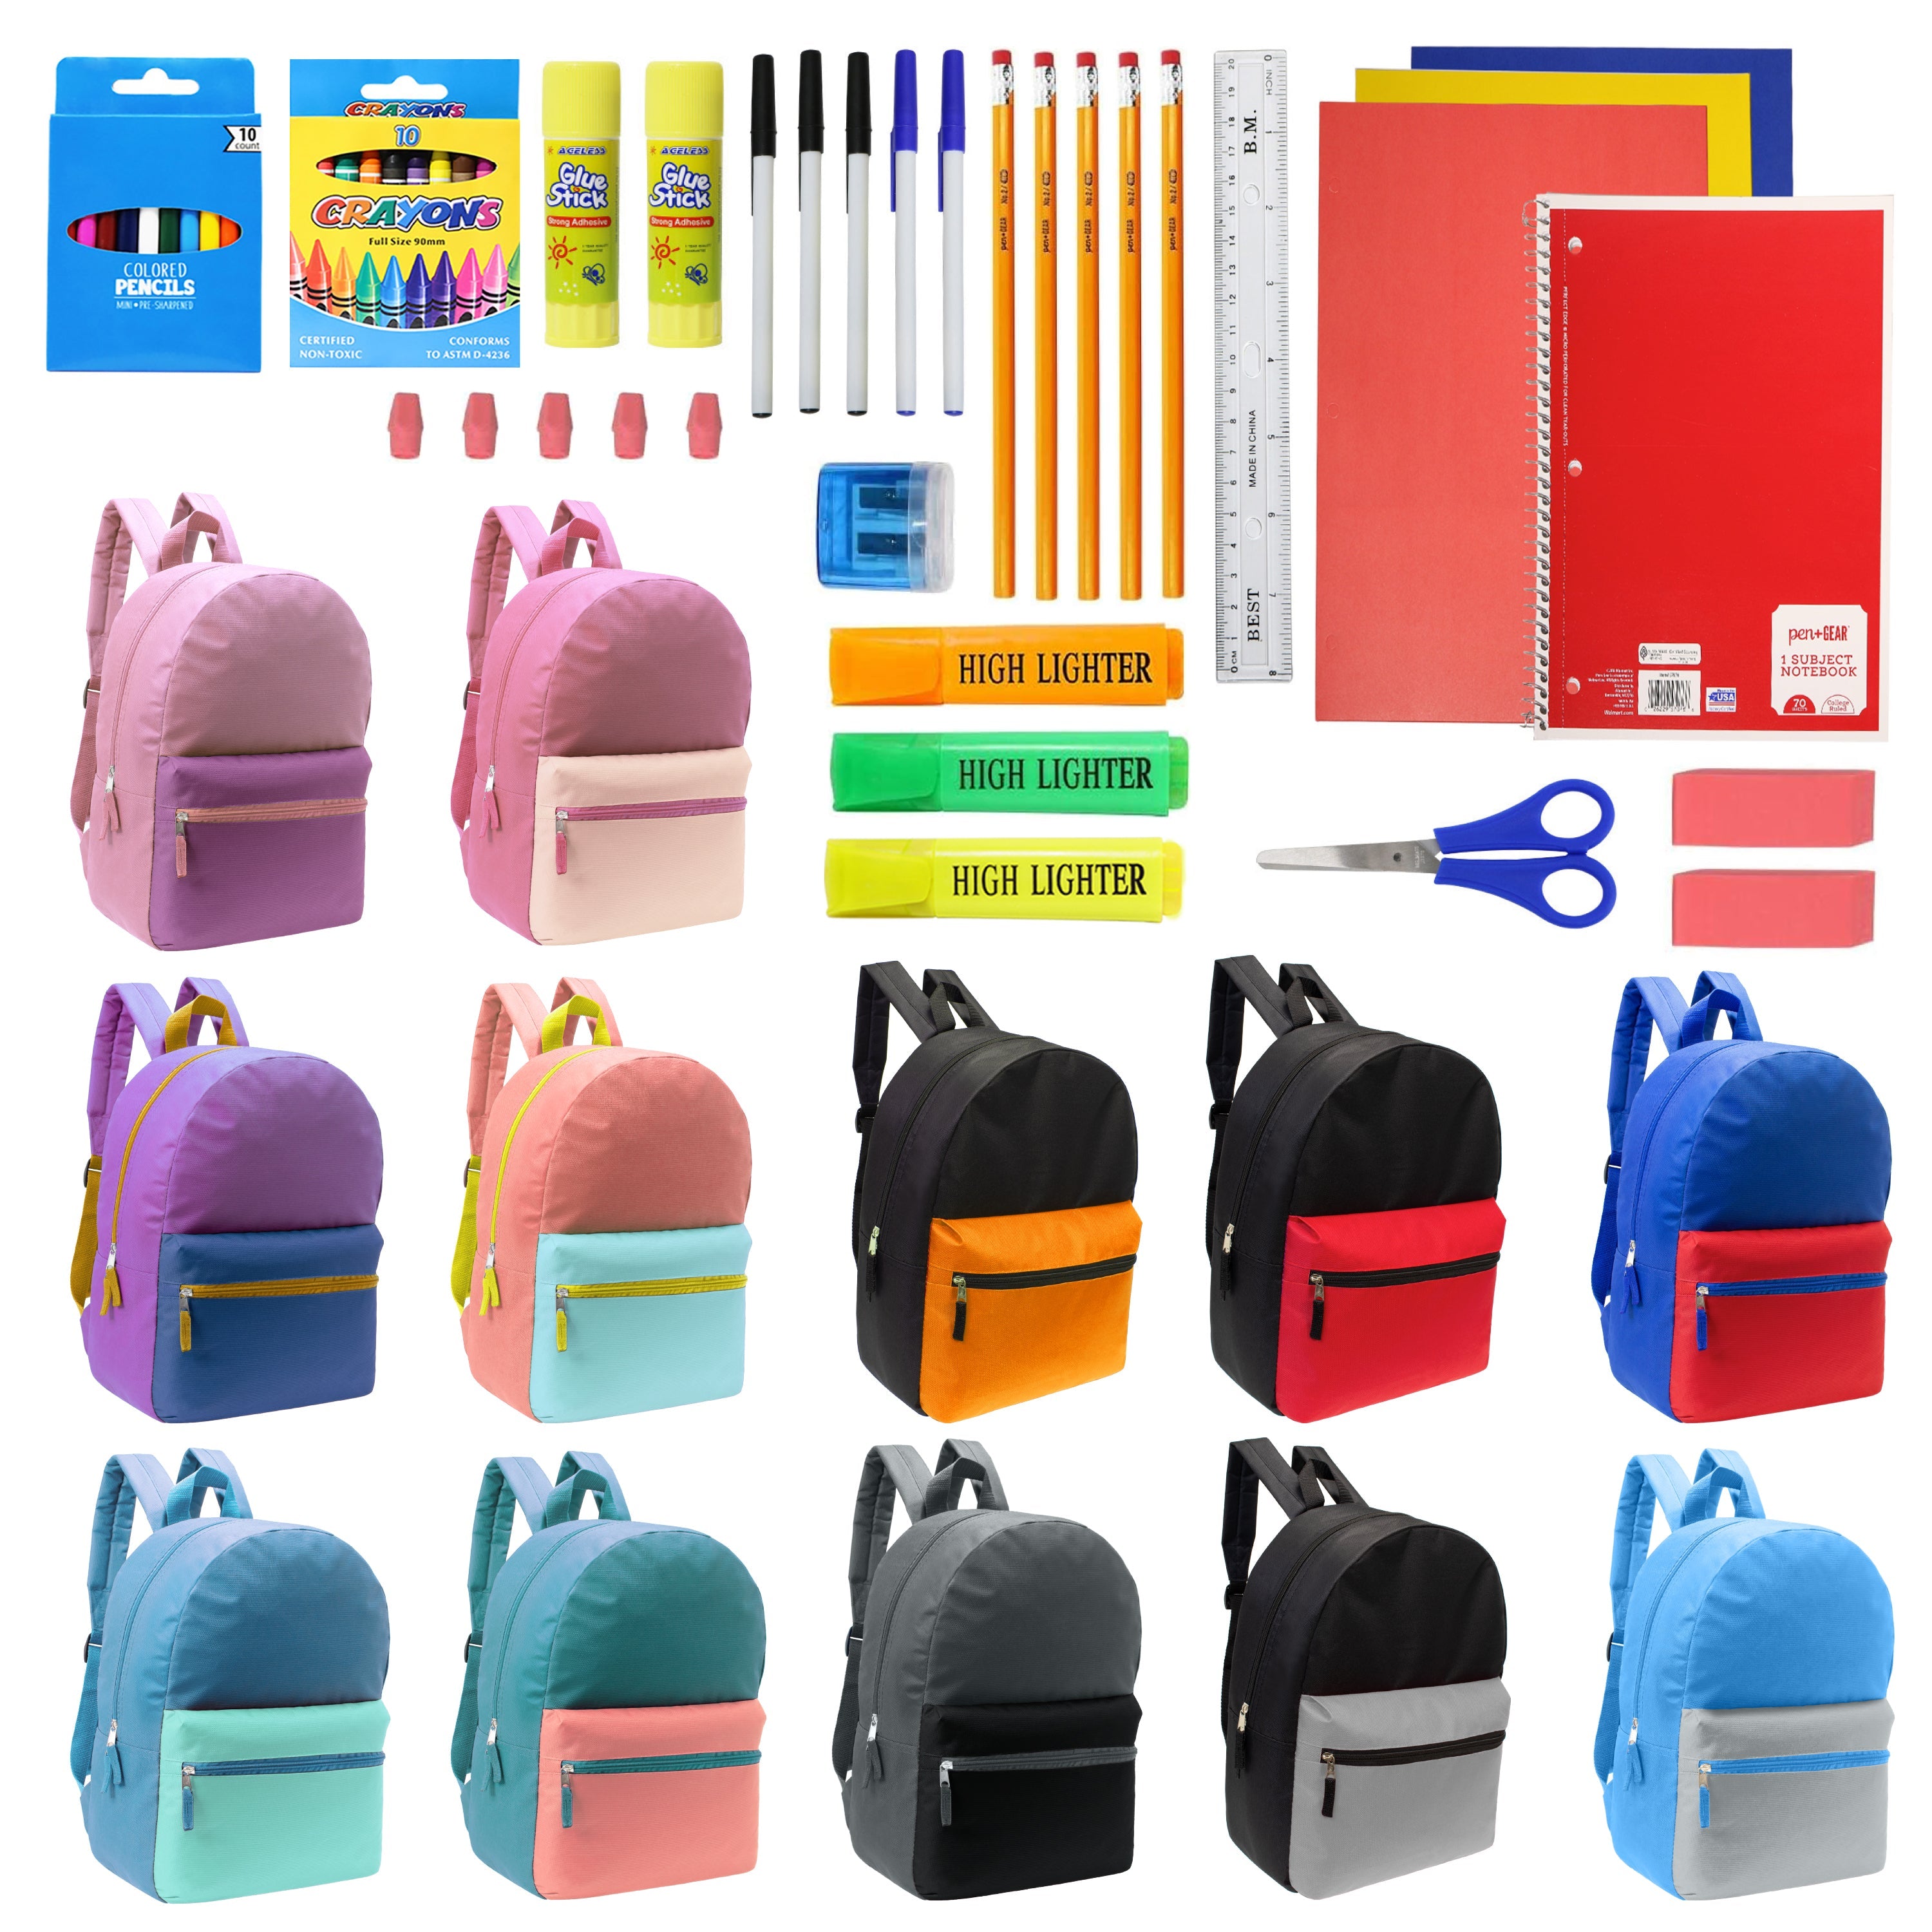 12 Wholesale Multi Color Student Backpacks in Assorted Colors and 12 Bulk School Supply Kits of Your Choice